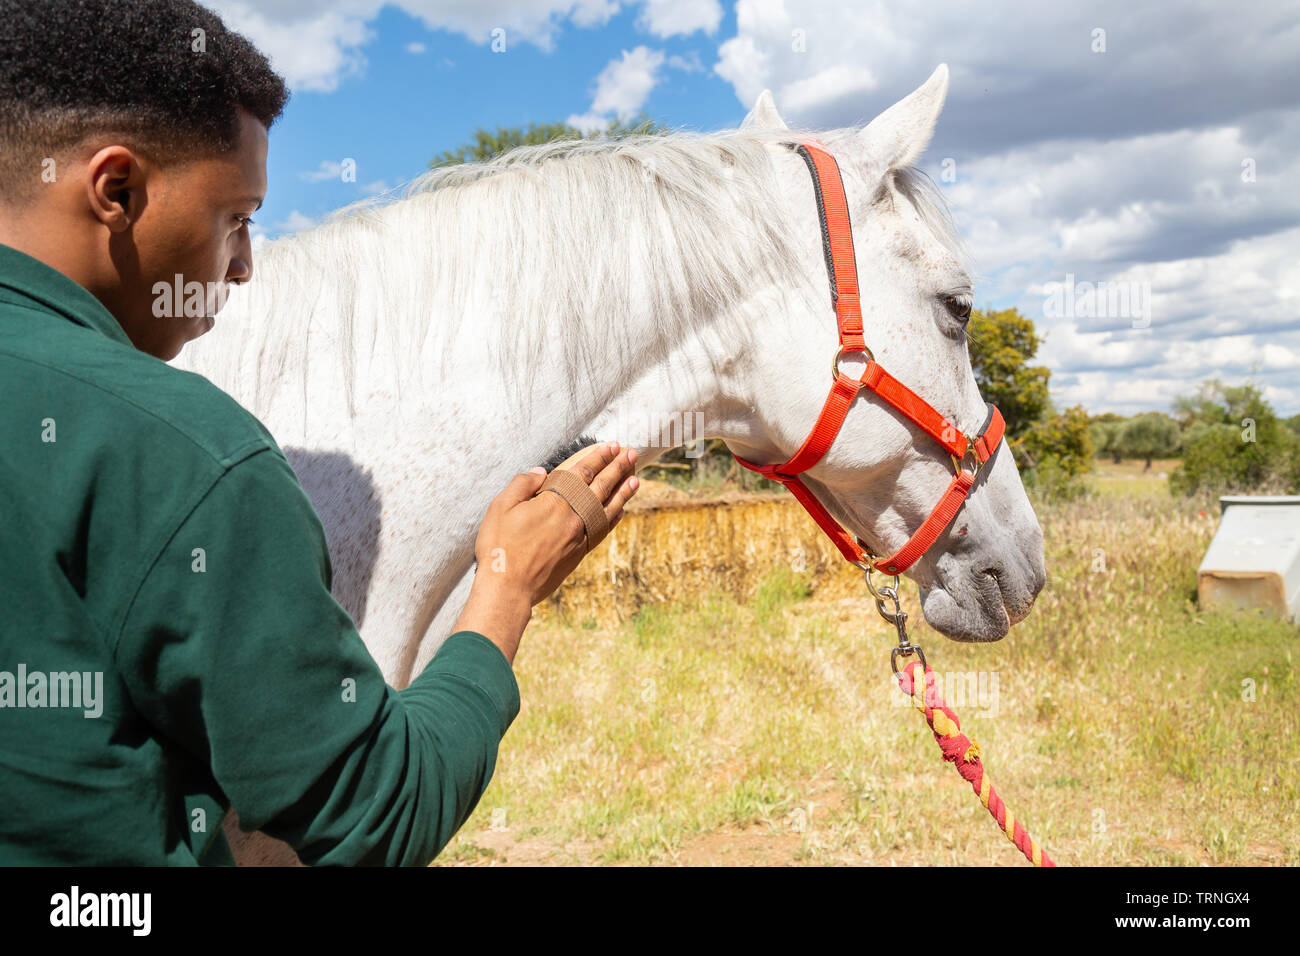 Back view of young African American male using brush to care for hair of white horse on cloudy day ranch Stock Photo